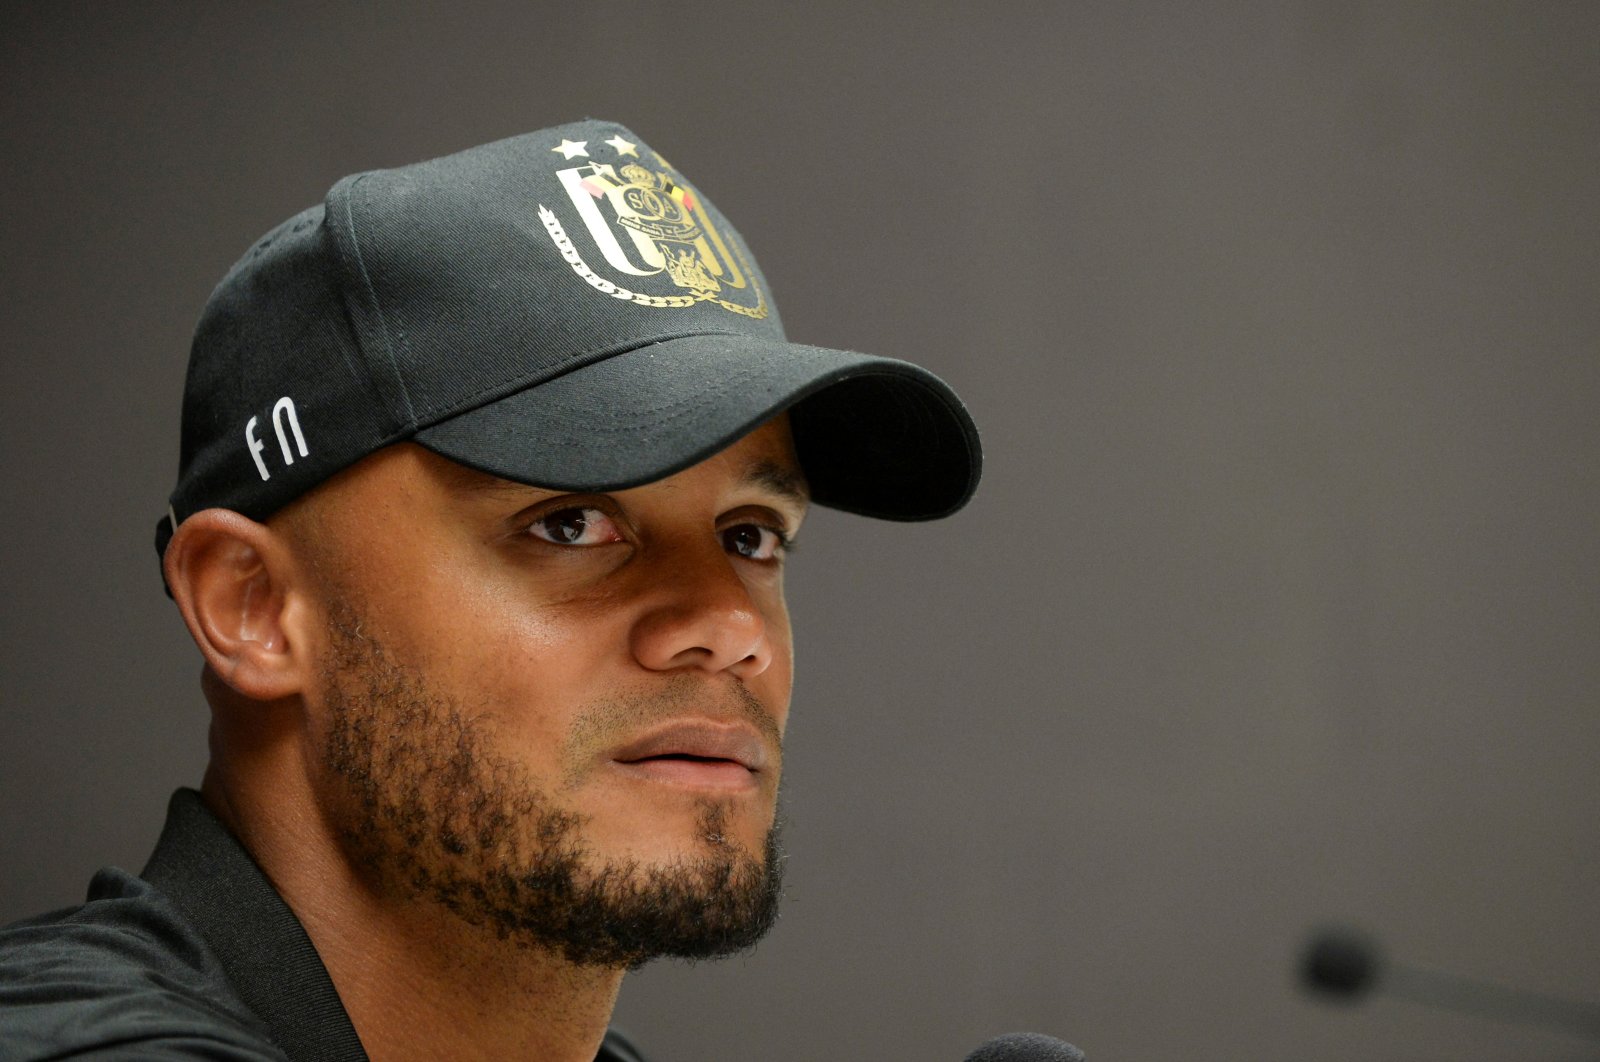 Vincent Kompany speaks at a press conference, Brussels, Belgium, Aug. 17, 2020. (Reuters Photo)